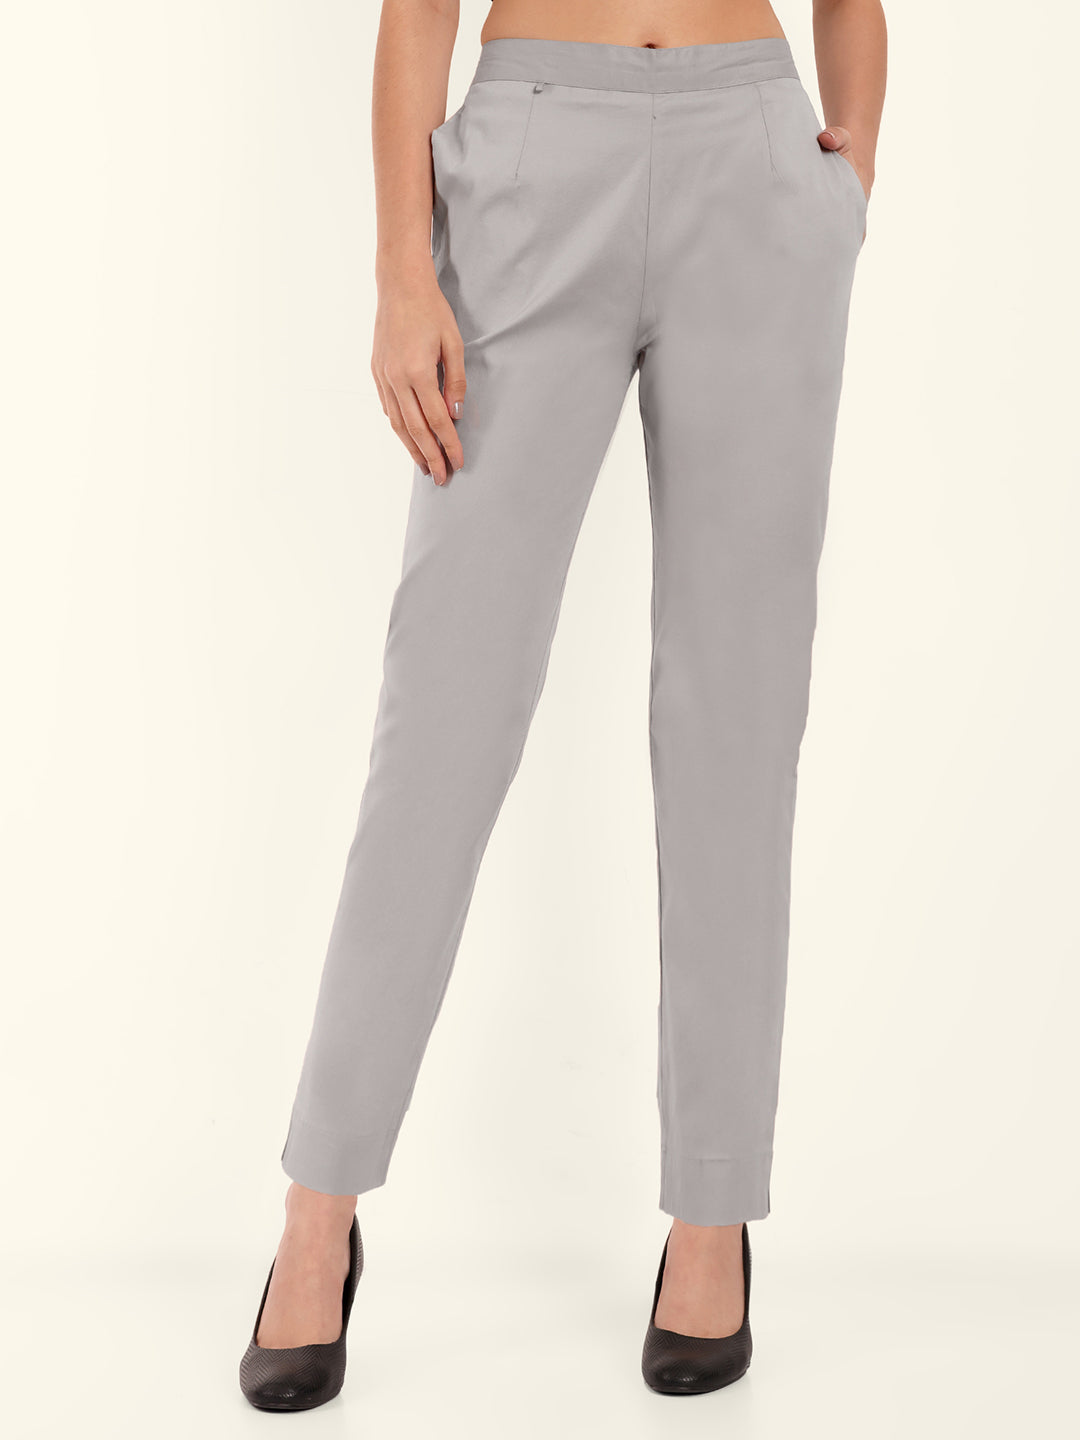 Mens Formal 4 way Stretch Trousers in Light Grey Slim Fit